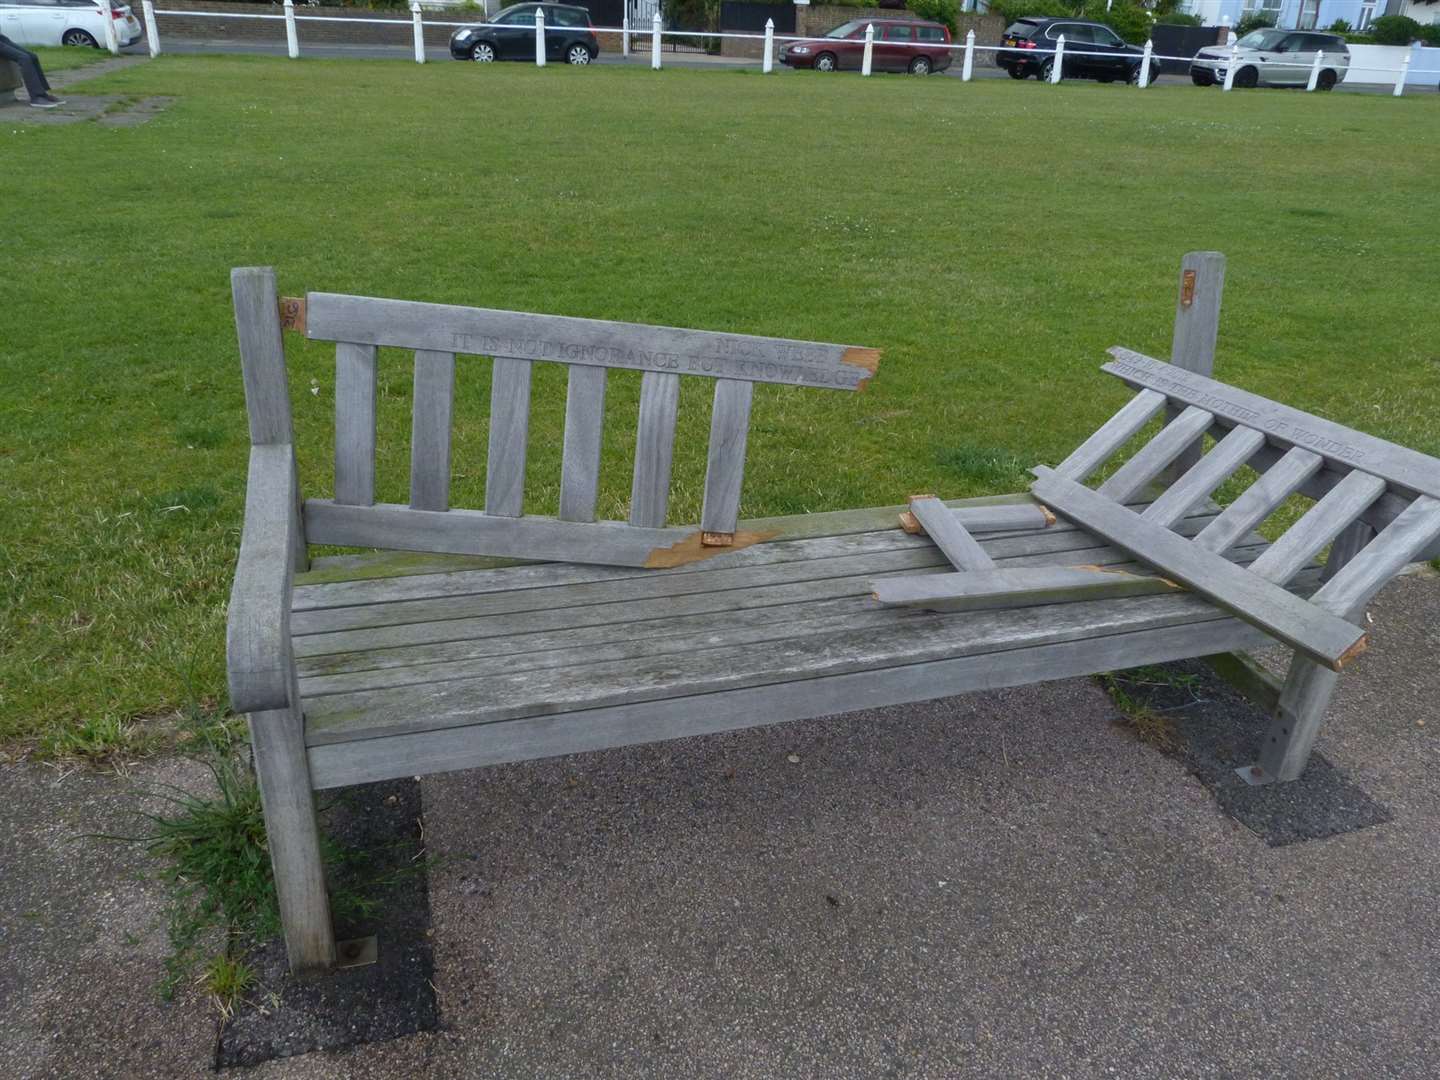 Memorial benches vandalised around Deal were not actually reported to police